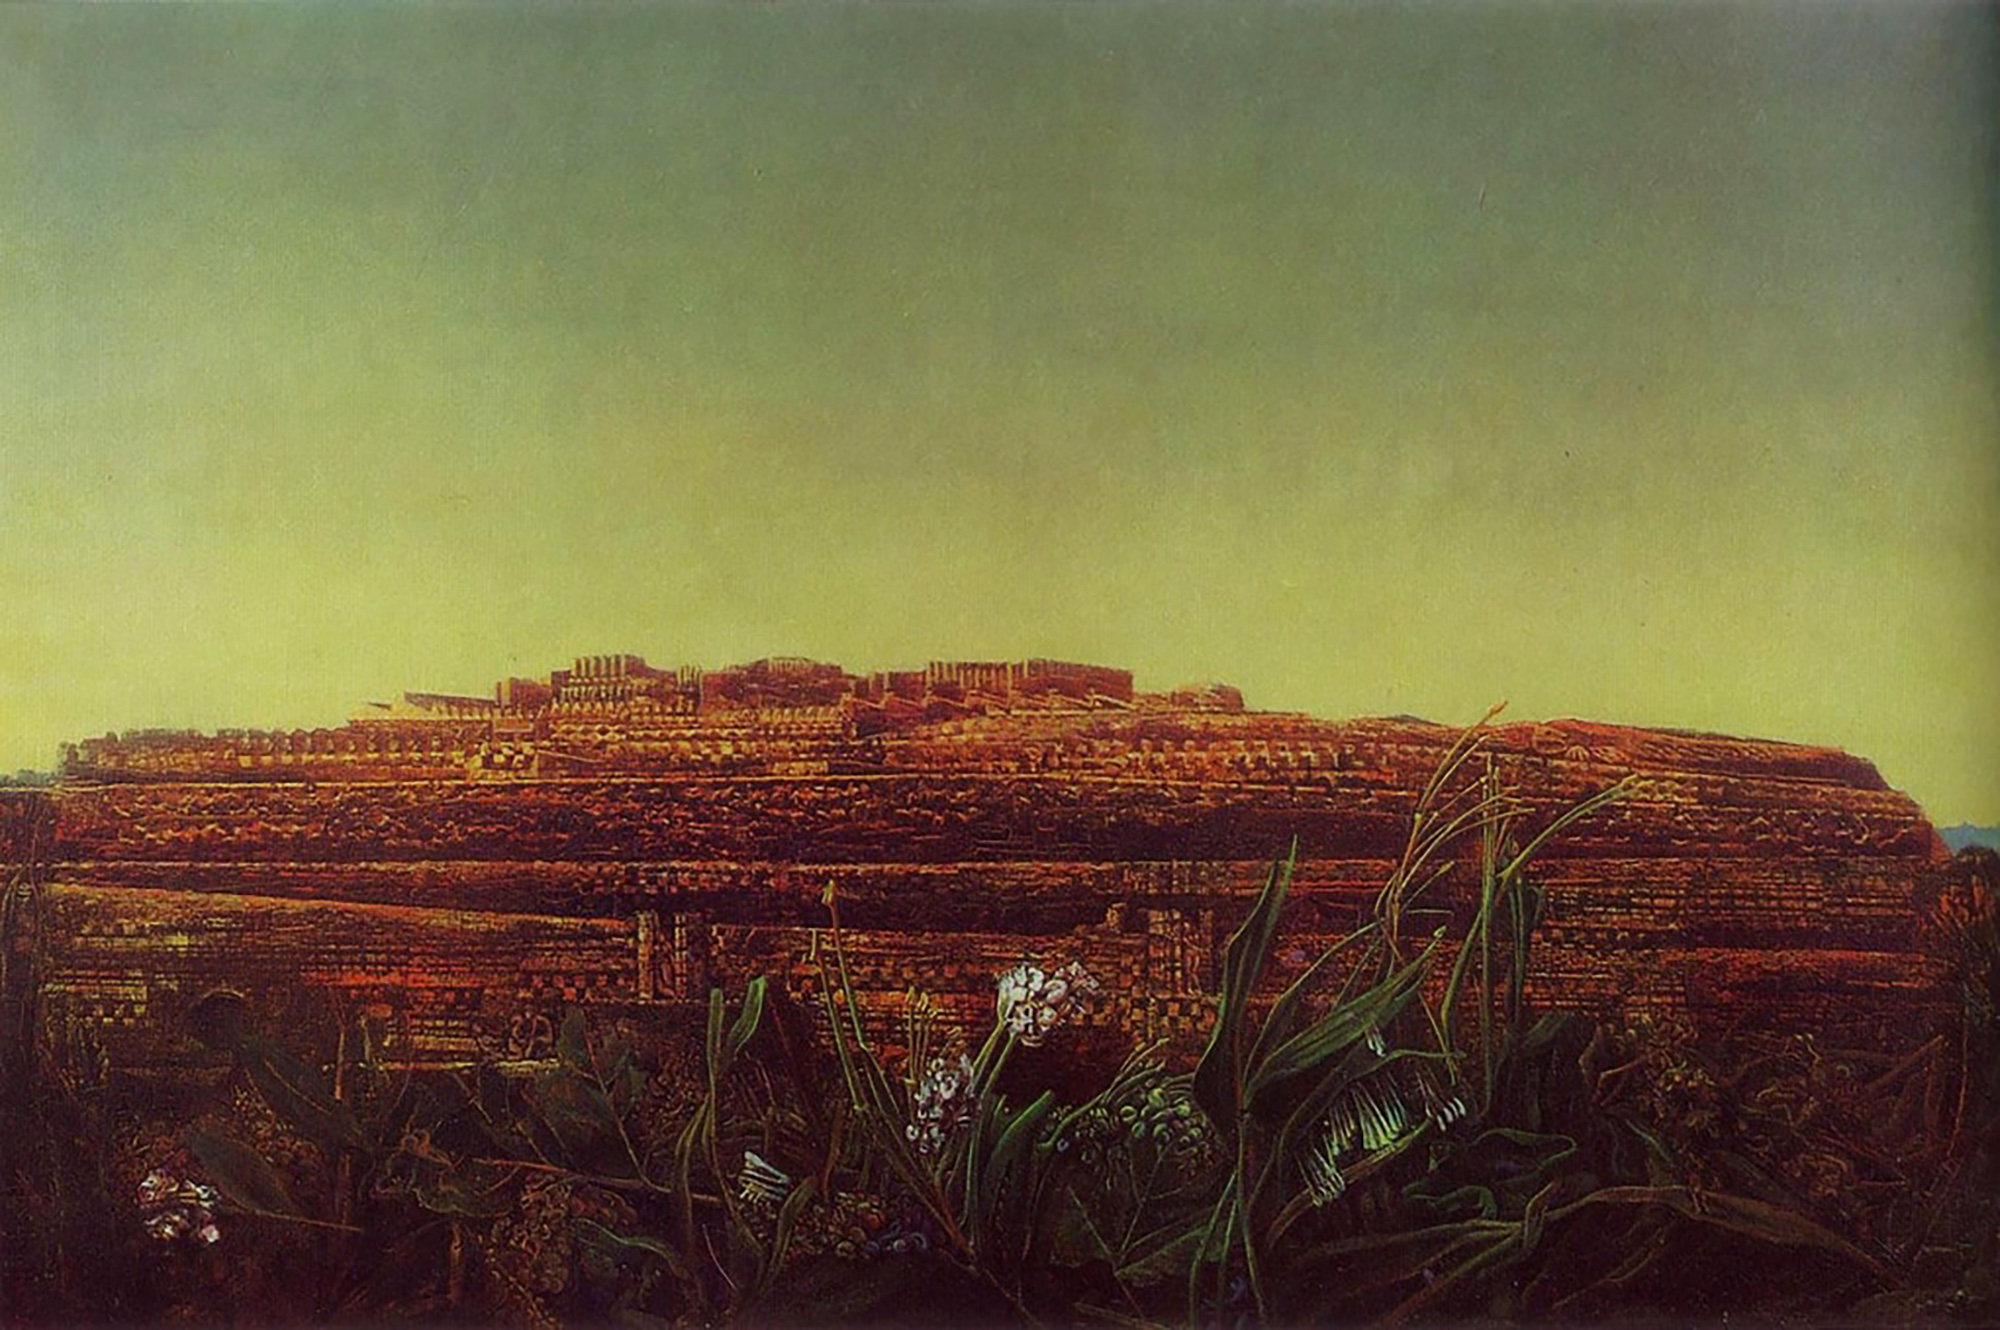 Max Ernst, “The Entire City”, oil on canvas 97x145cm, 1935